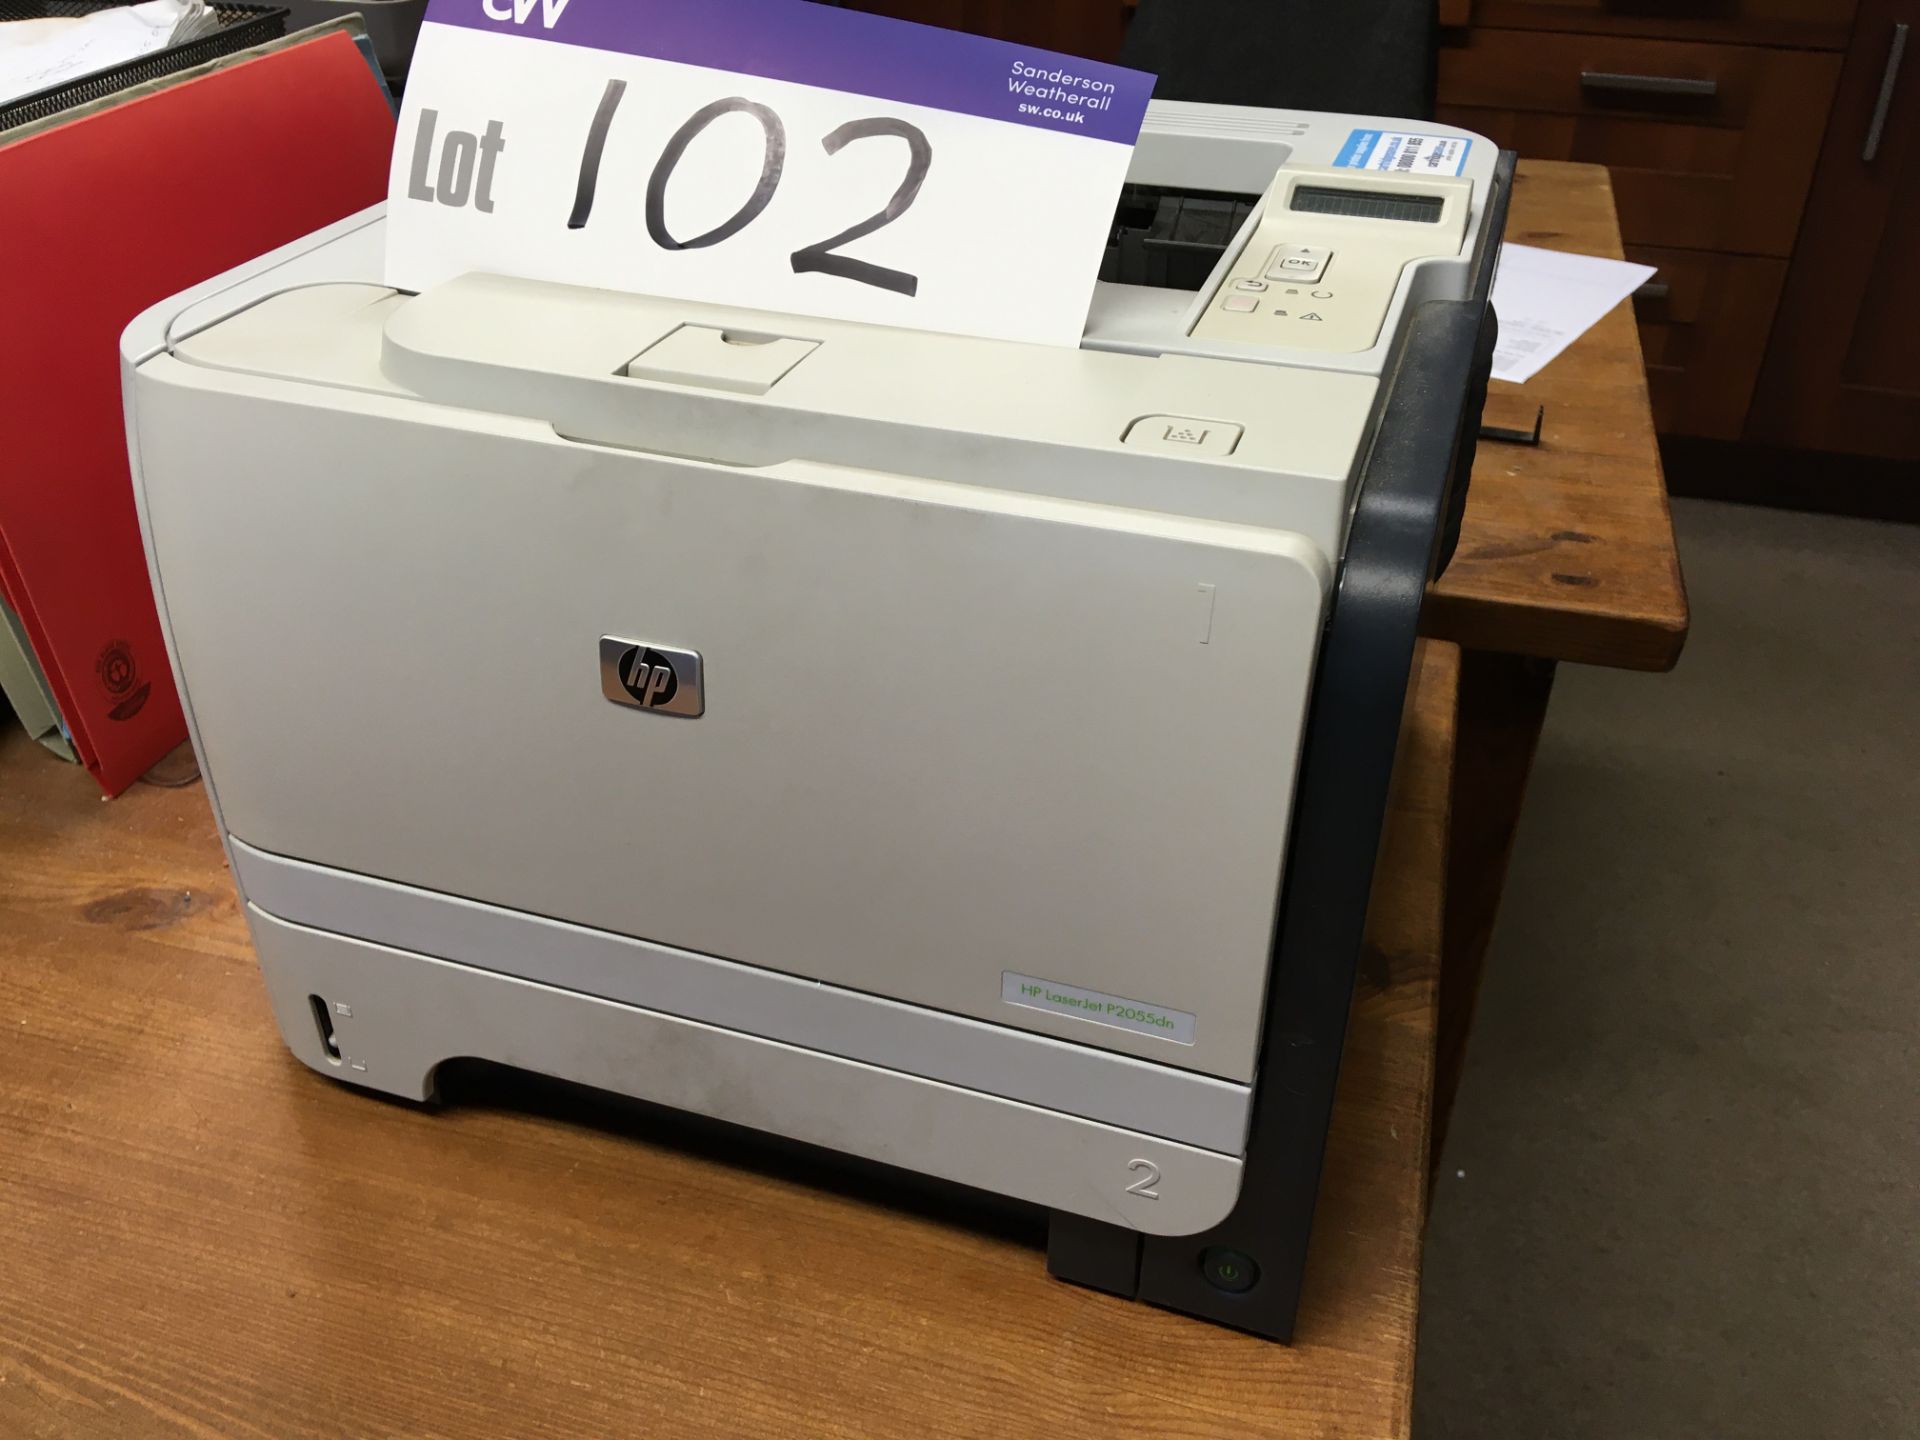 Hewlett Packard P2055dn Printer, free loading onto purchasers transport - yesPlease read the